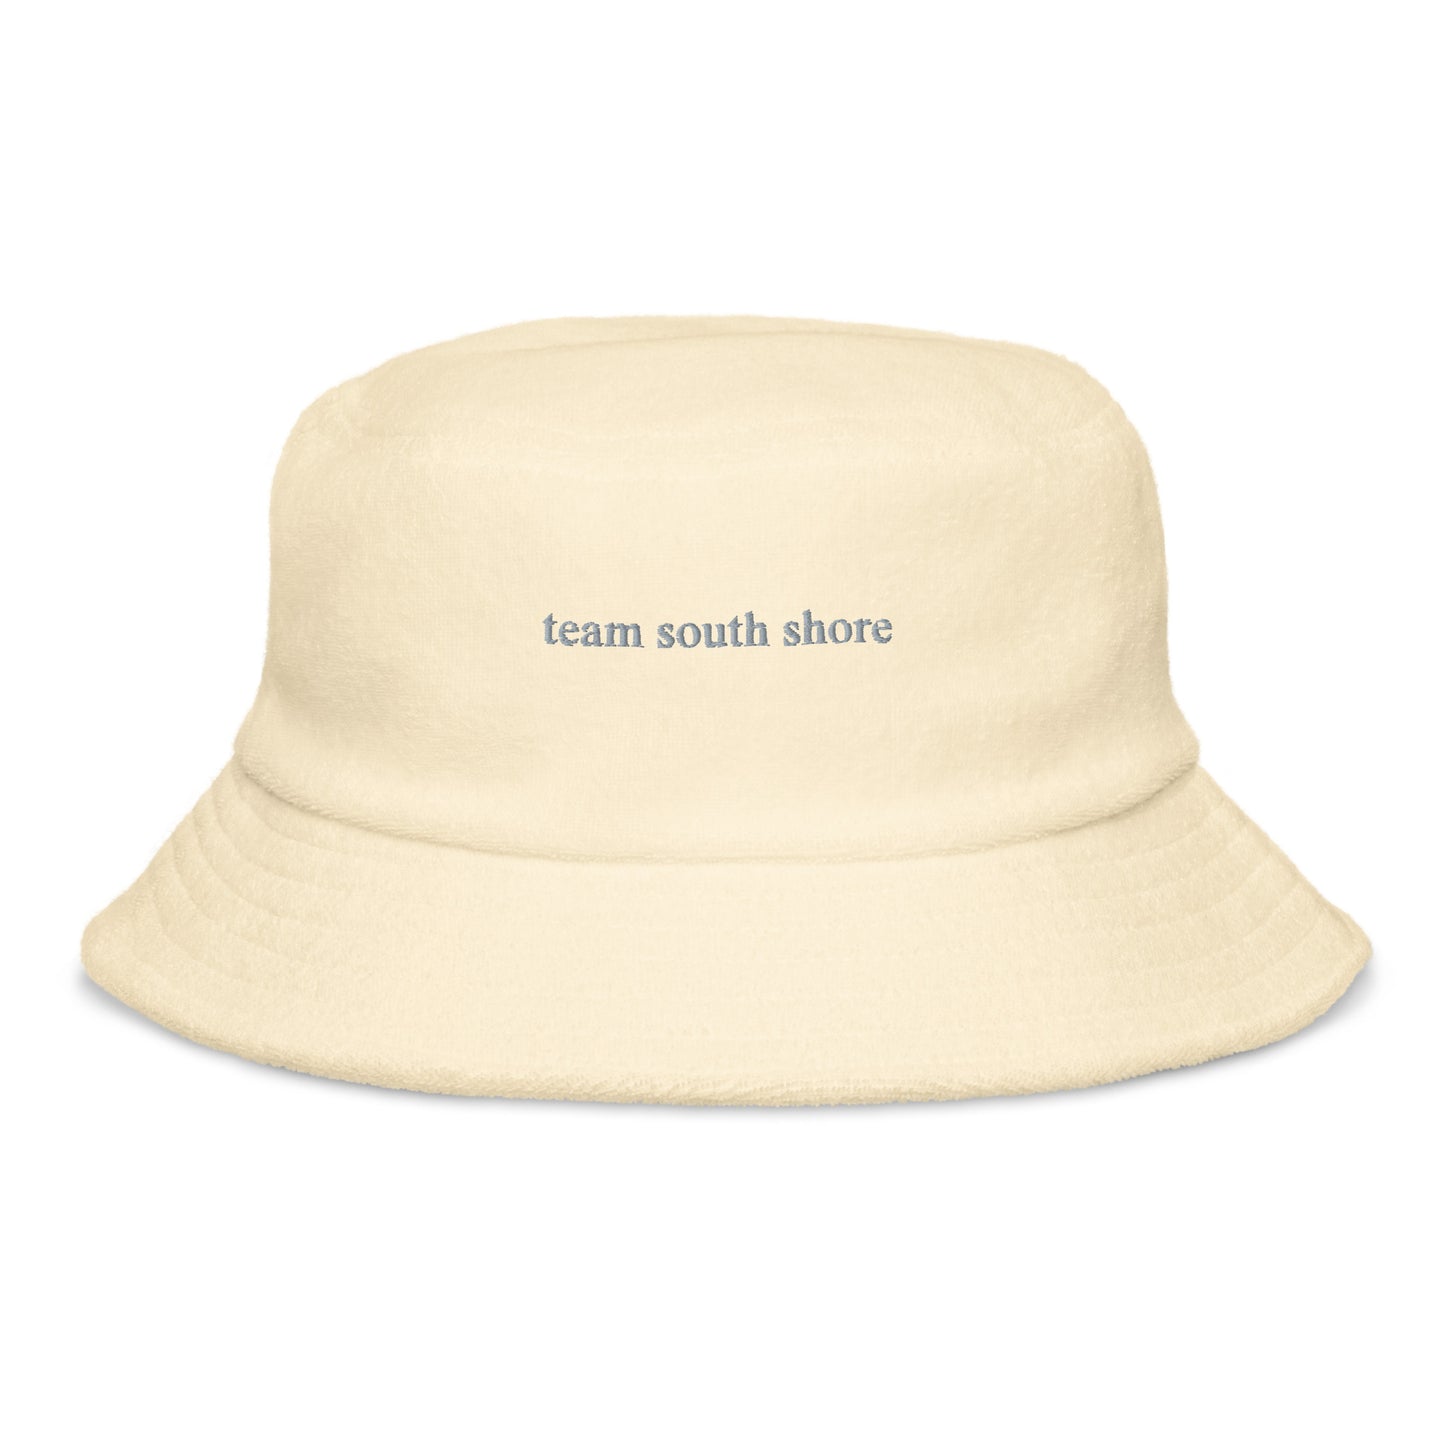 yellow bucket hat that says "team south shore" in grey lettering